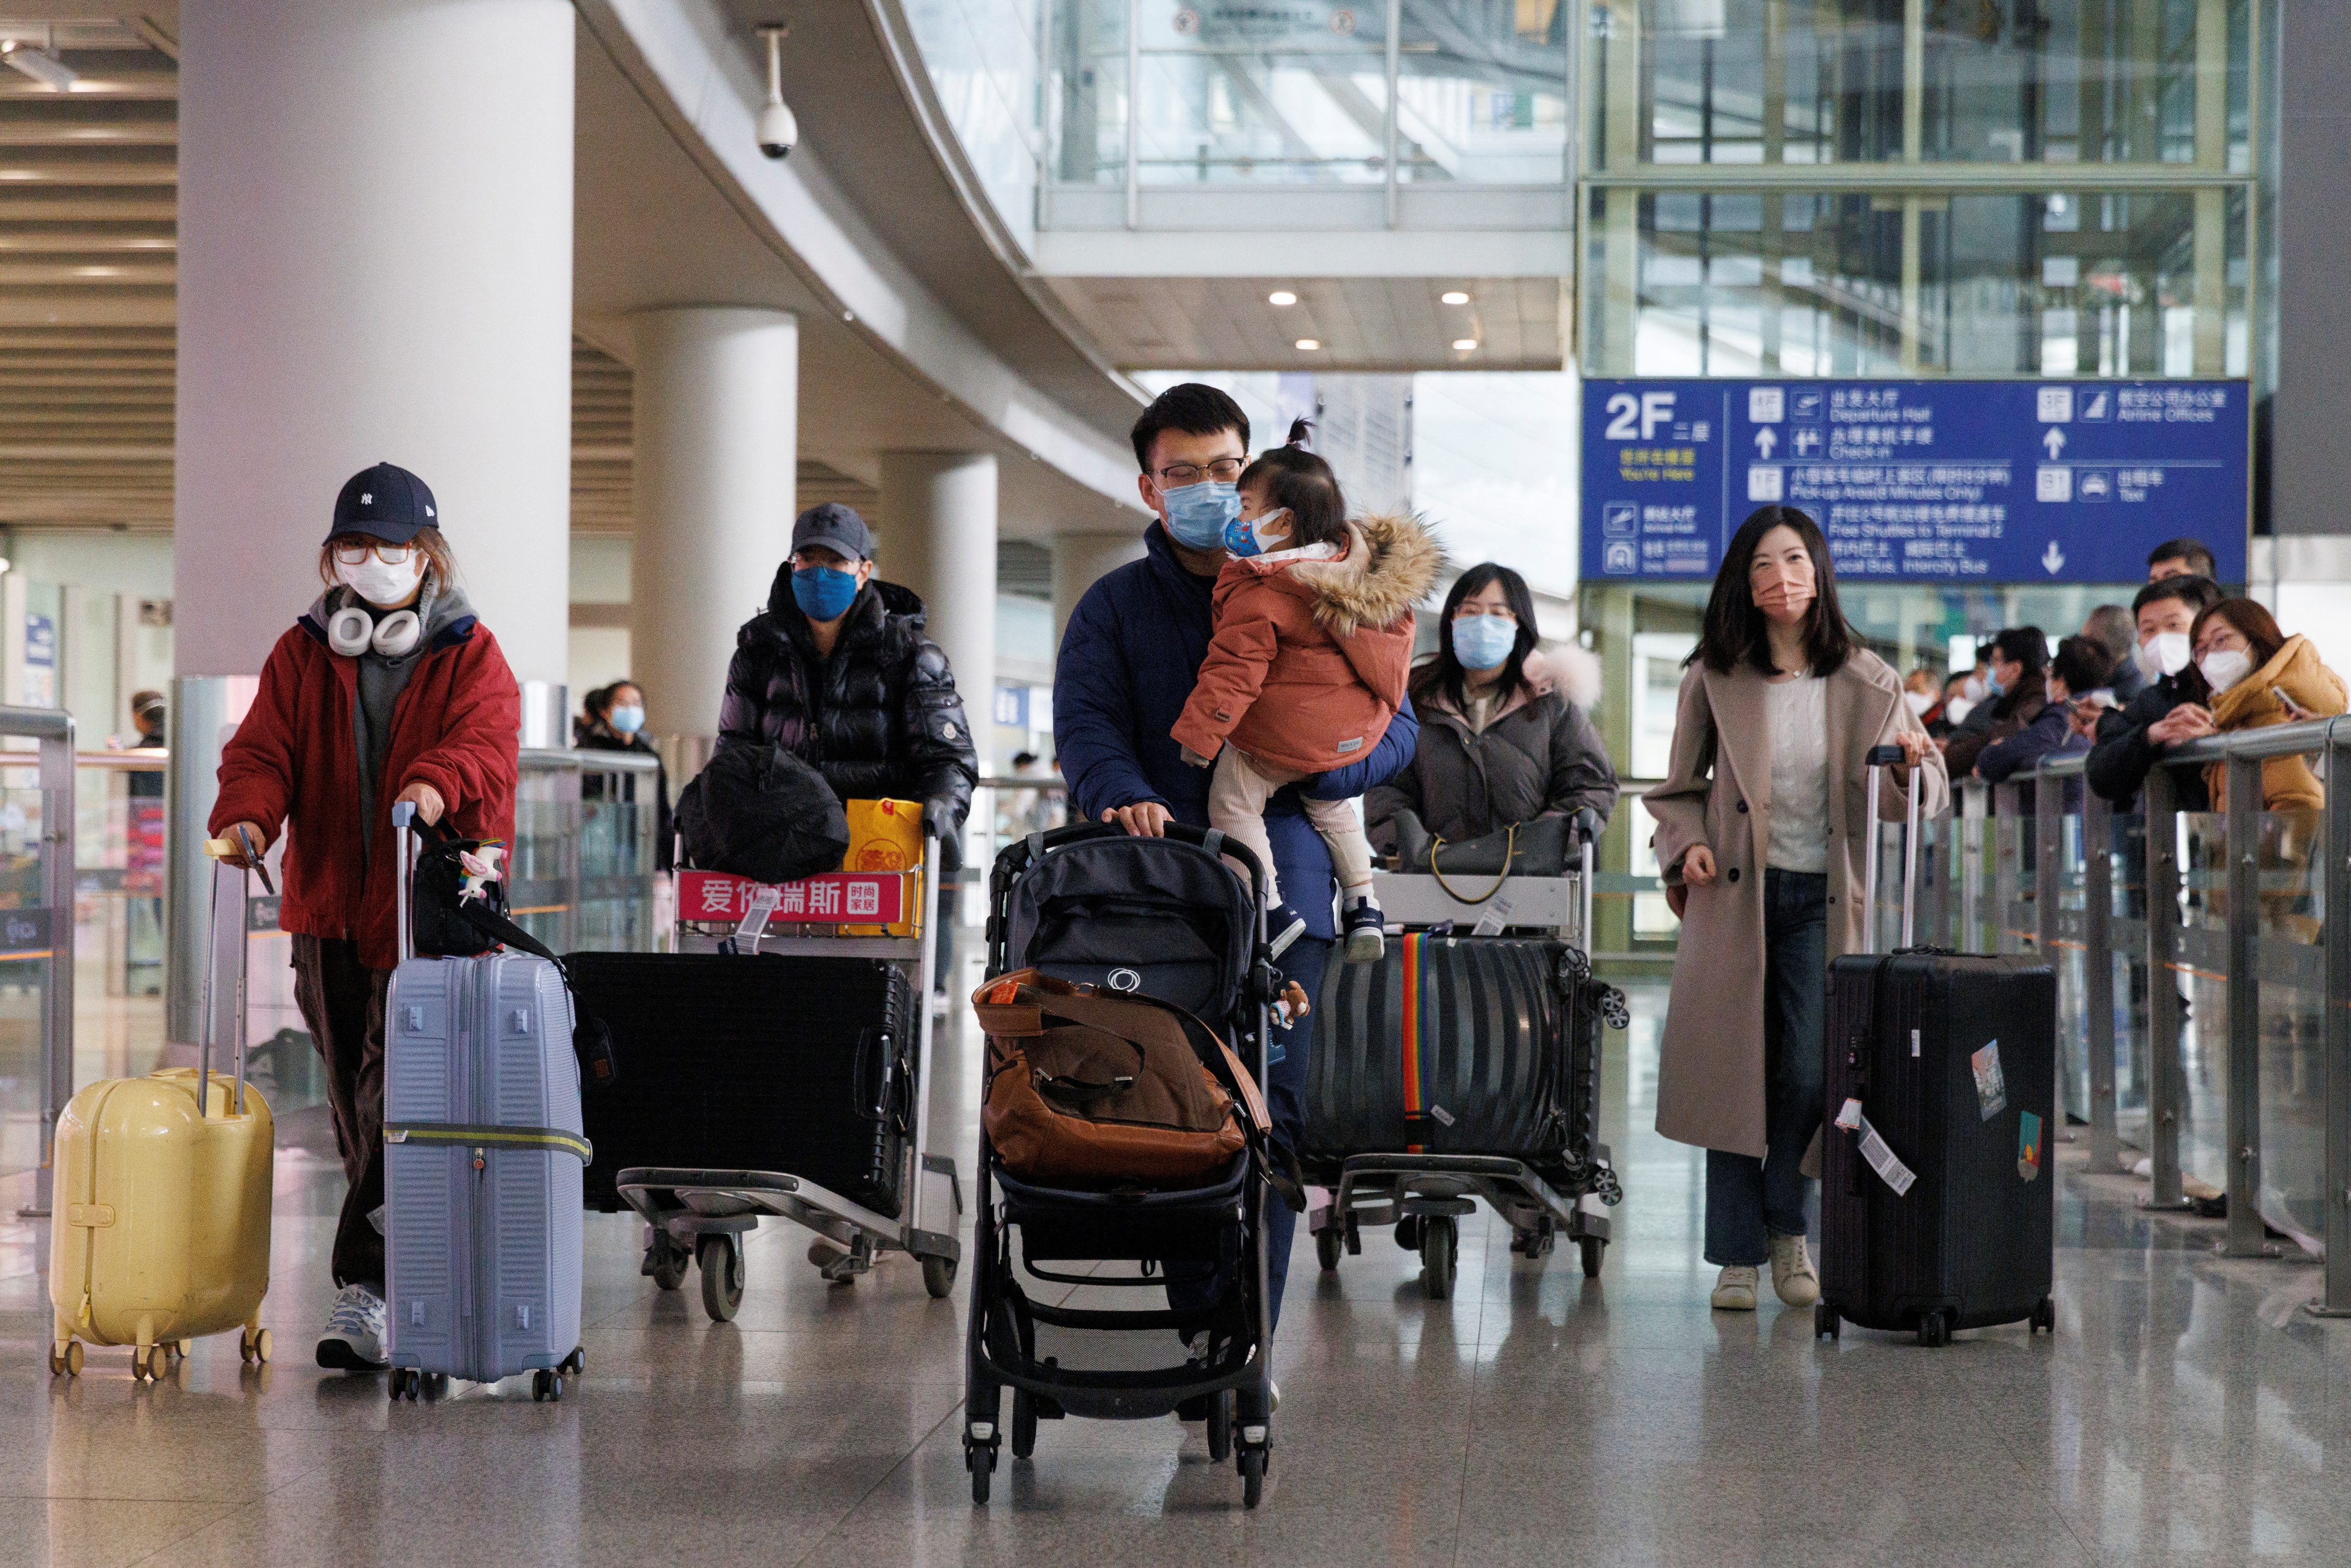 Passengers push their luggage through the international arrivals hall at the Beijing Capital International Airport after China lifted the COVID-19 quarantine requirement for incoming travelers in Beijing